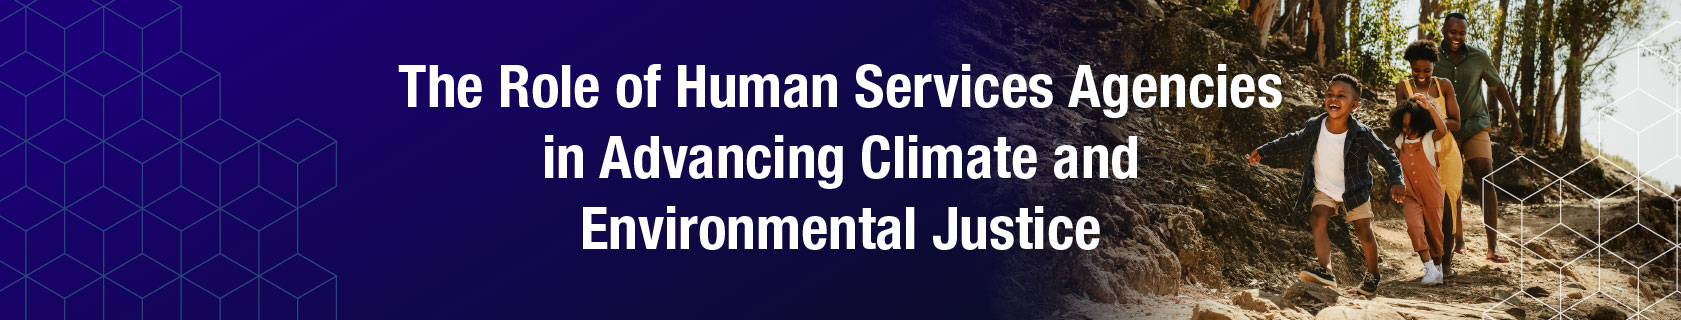 The Role of Human Services Agencies in Advancing Climate and Environmental Justice